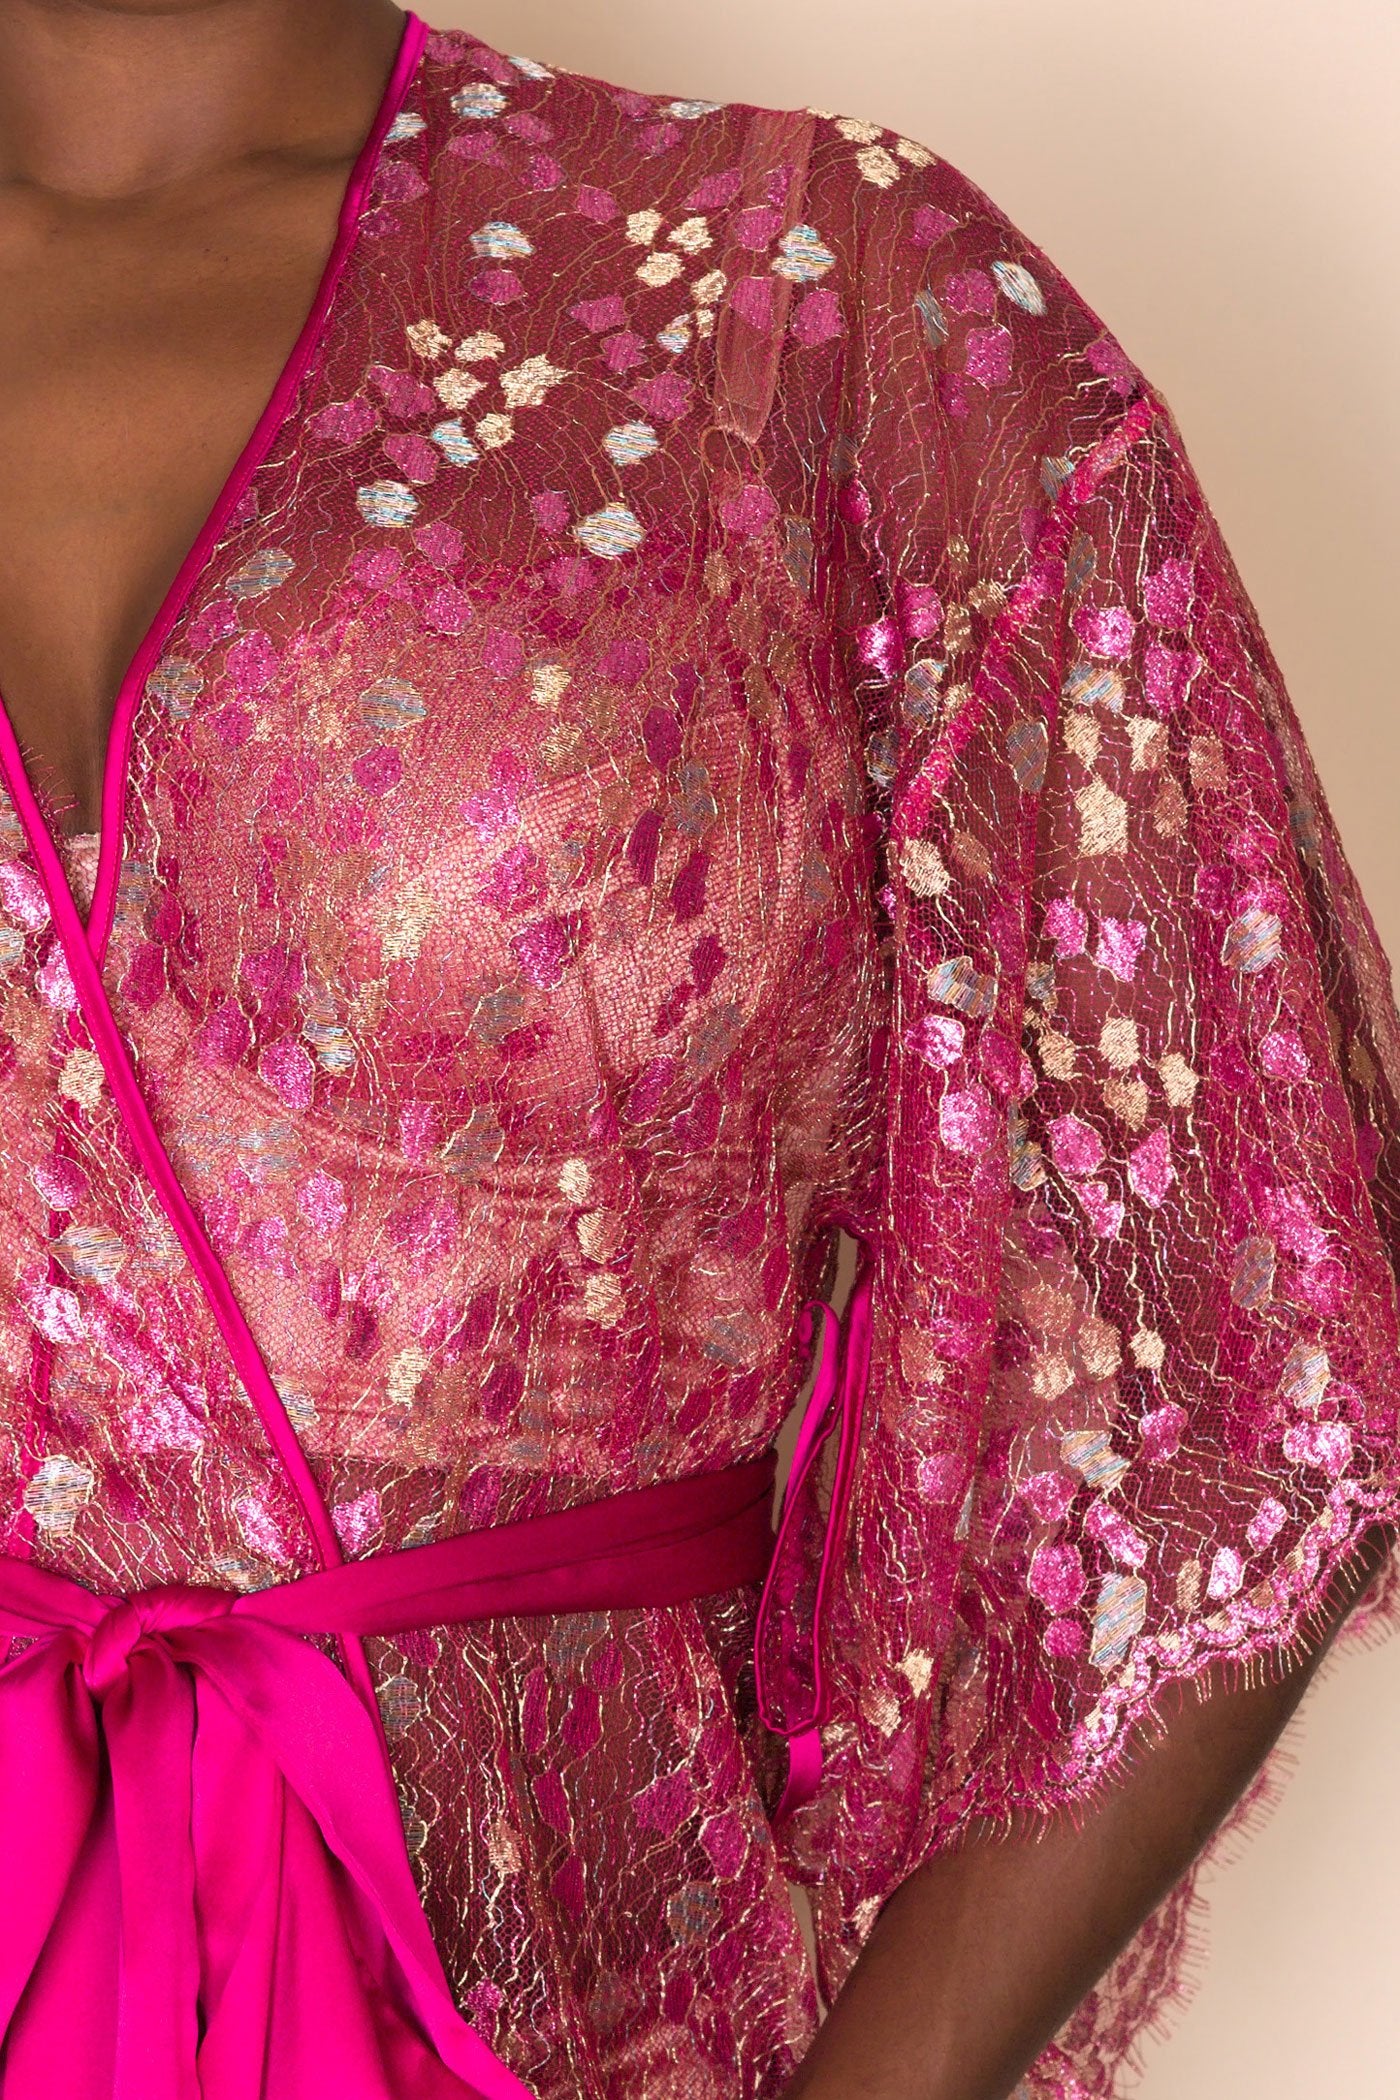 Lace sleeve detail on metallic pink sheer lace luxury dressing gown